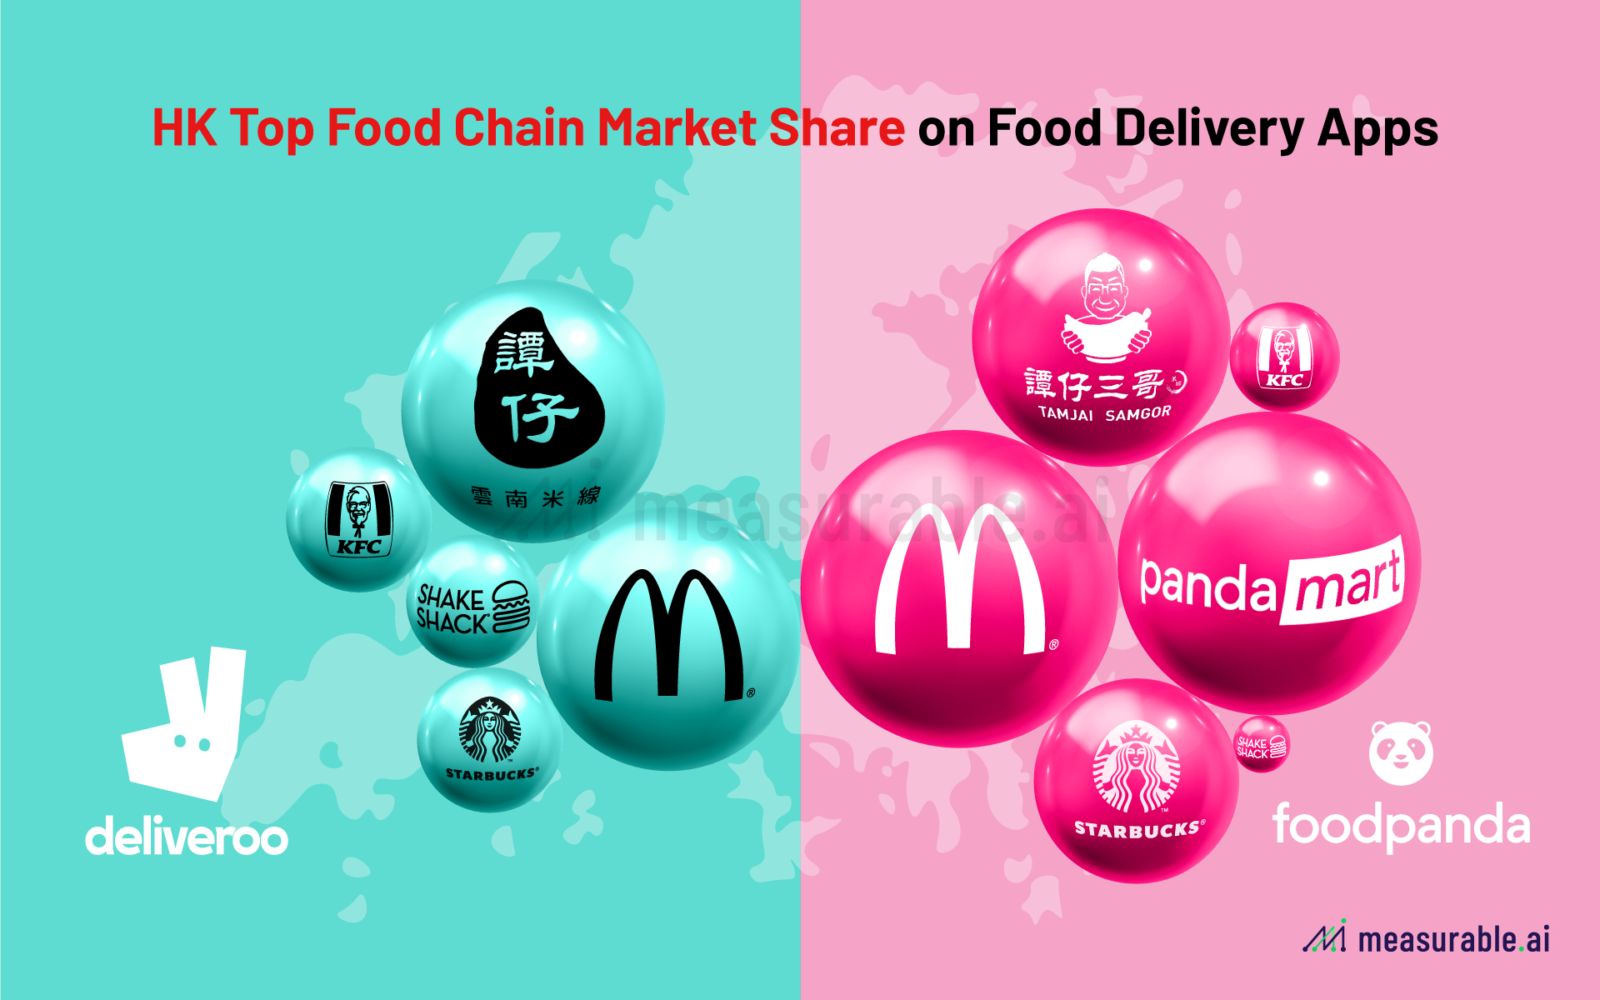 Top food chain market share on Food Delivery Apps in Hong Kong (2022 Q2)